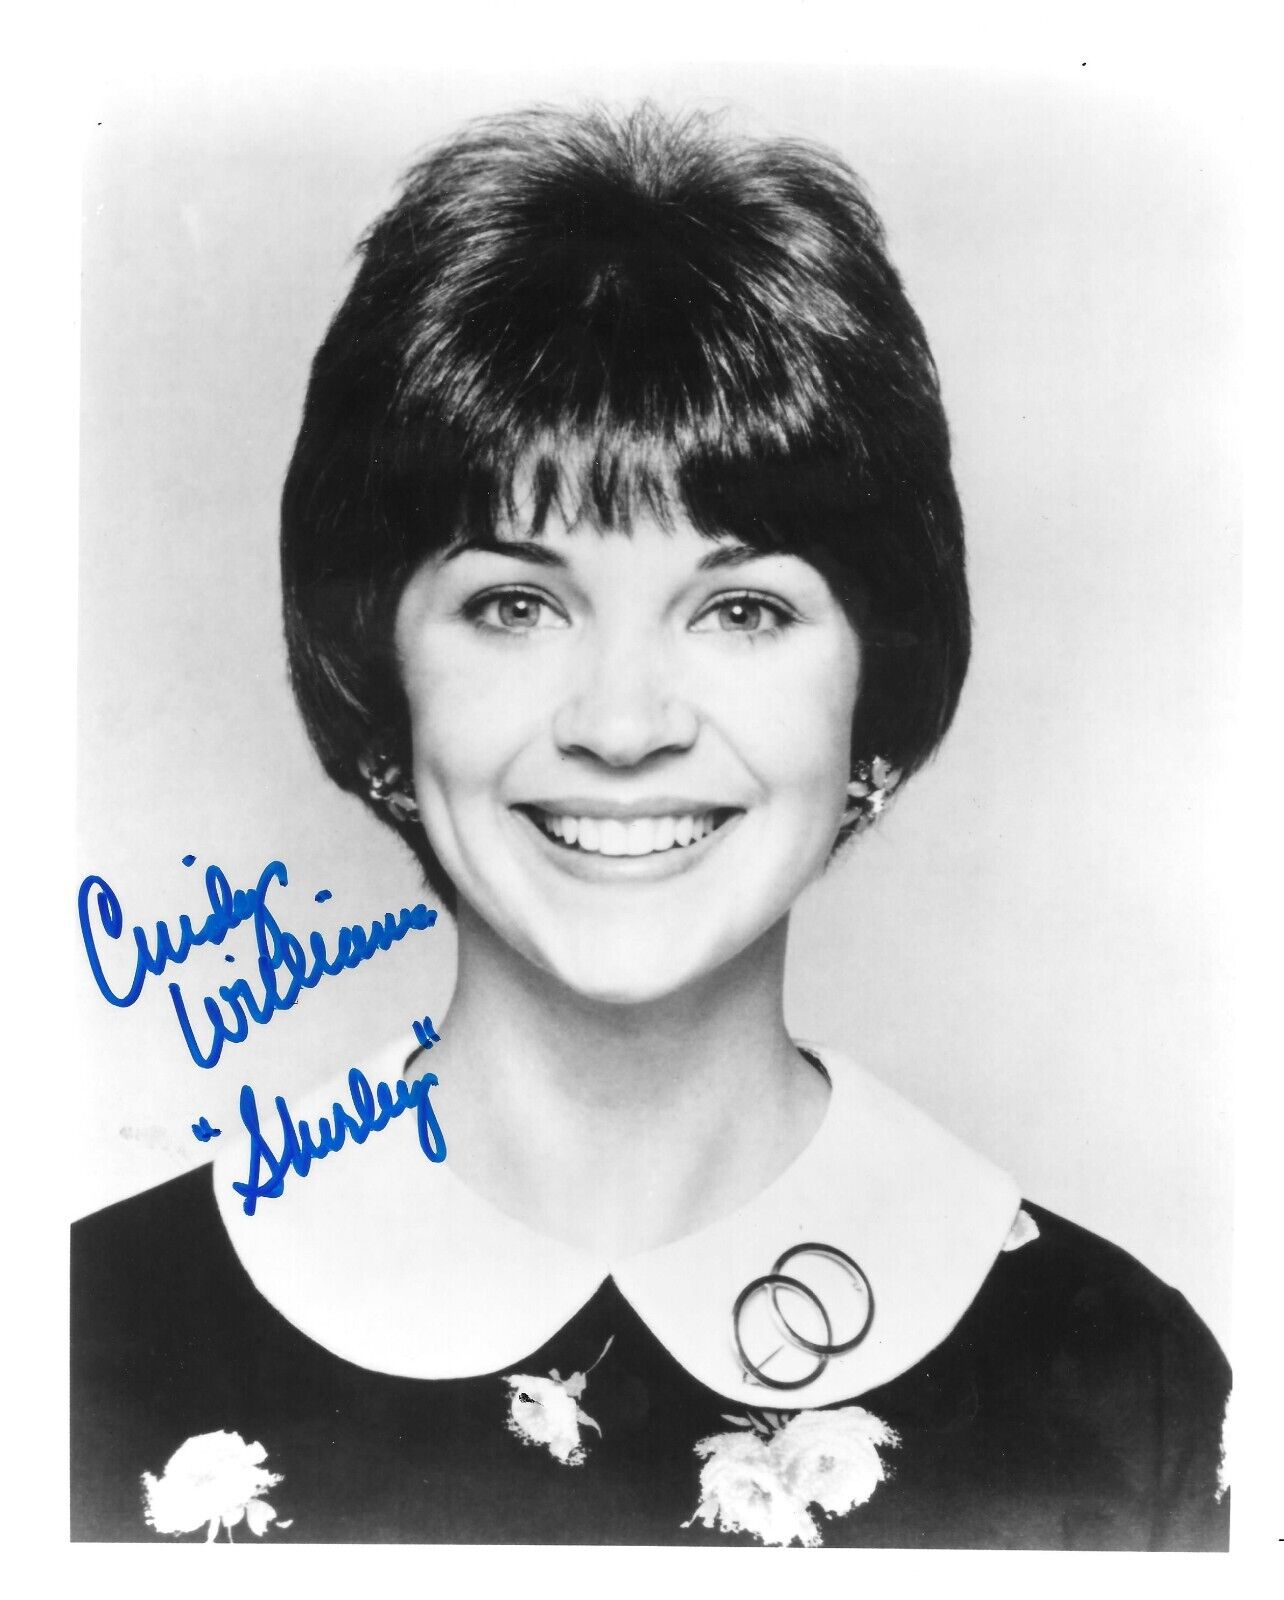 Guaranteed 8x10 Autographed by Cindy Williams 